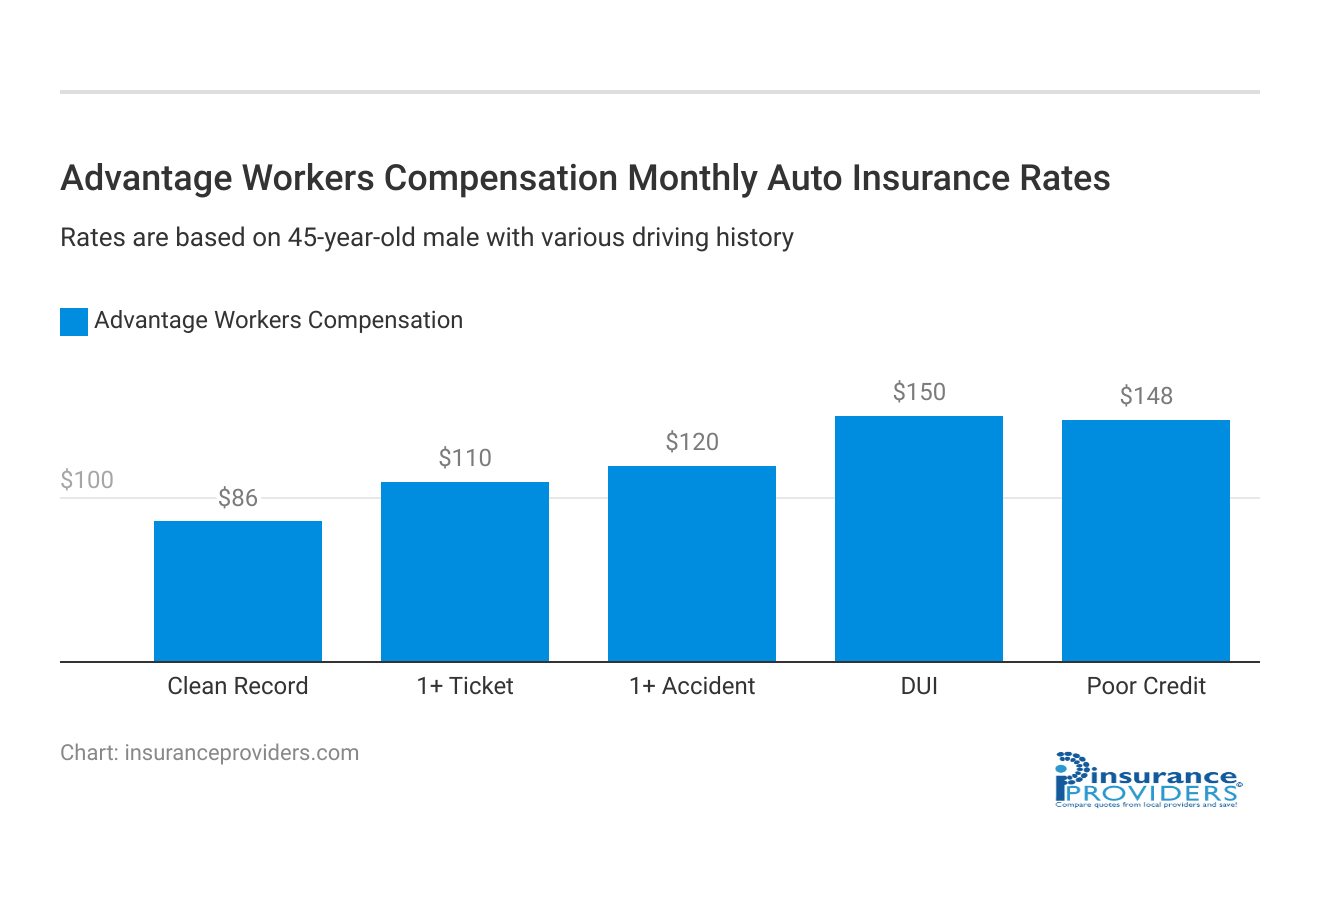 <h3>Advantage Workers Compensation Monthly Auto Insurance Rates</h3>